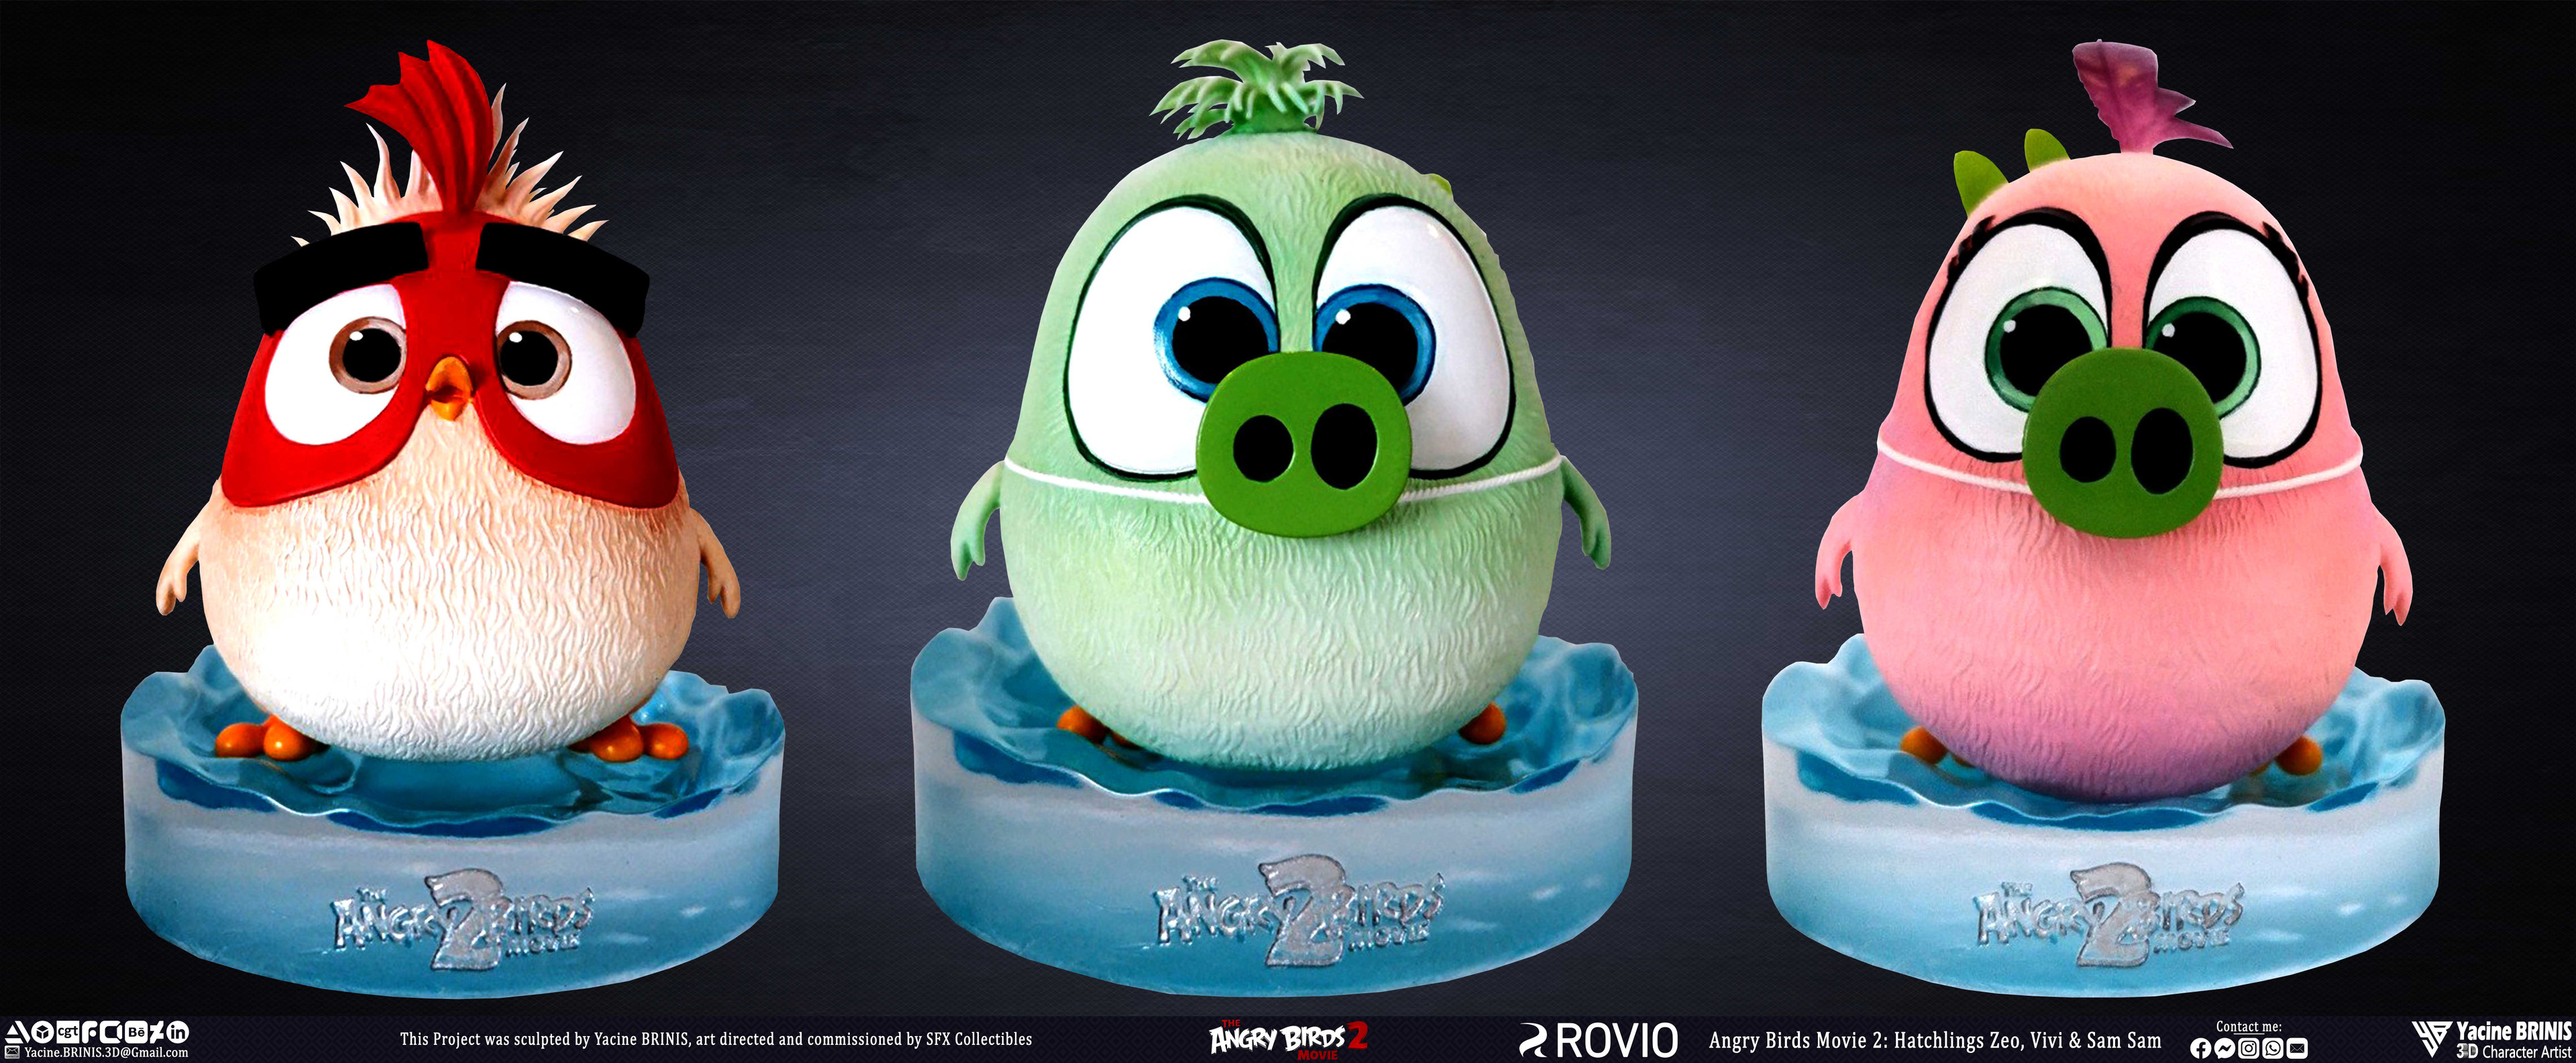 Angry Birds Movie 2 Rovio Entertainment Sculpted by Yacine BRINIS 052 Hatchlings Sam Sam, Vivi and Zoe Printed by SFX Collectibles